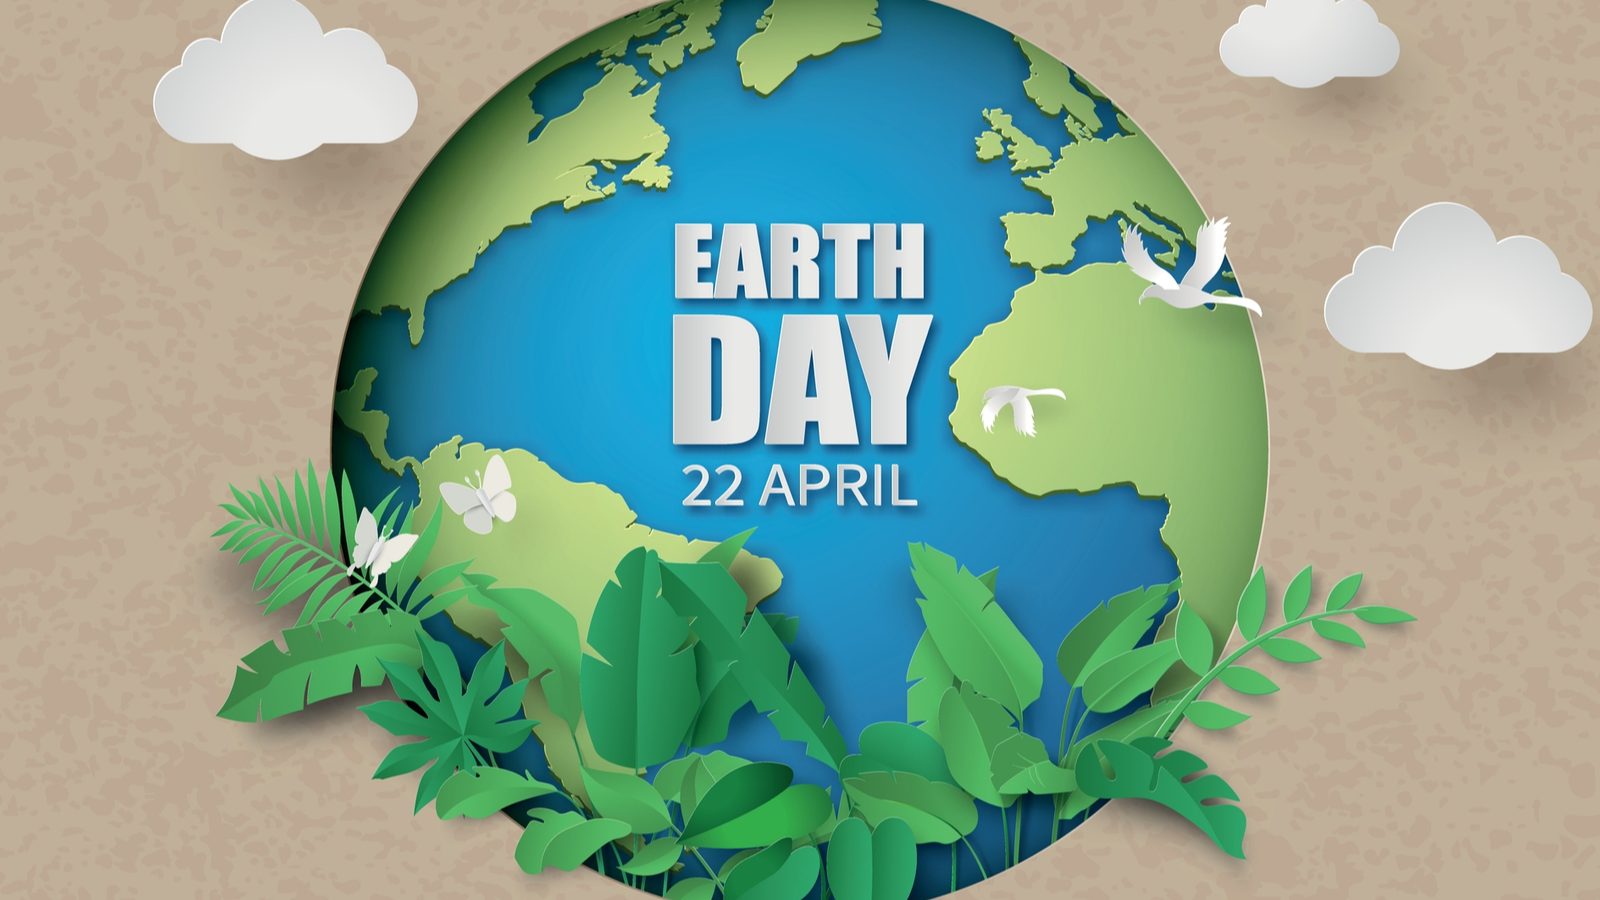 Earth Day 2022: History, Significance and Theme